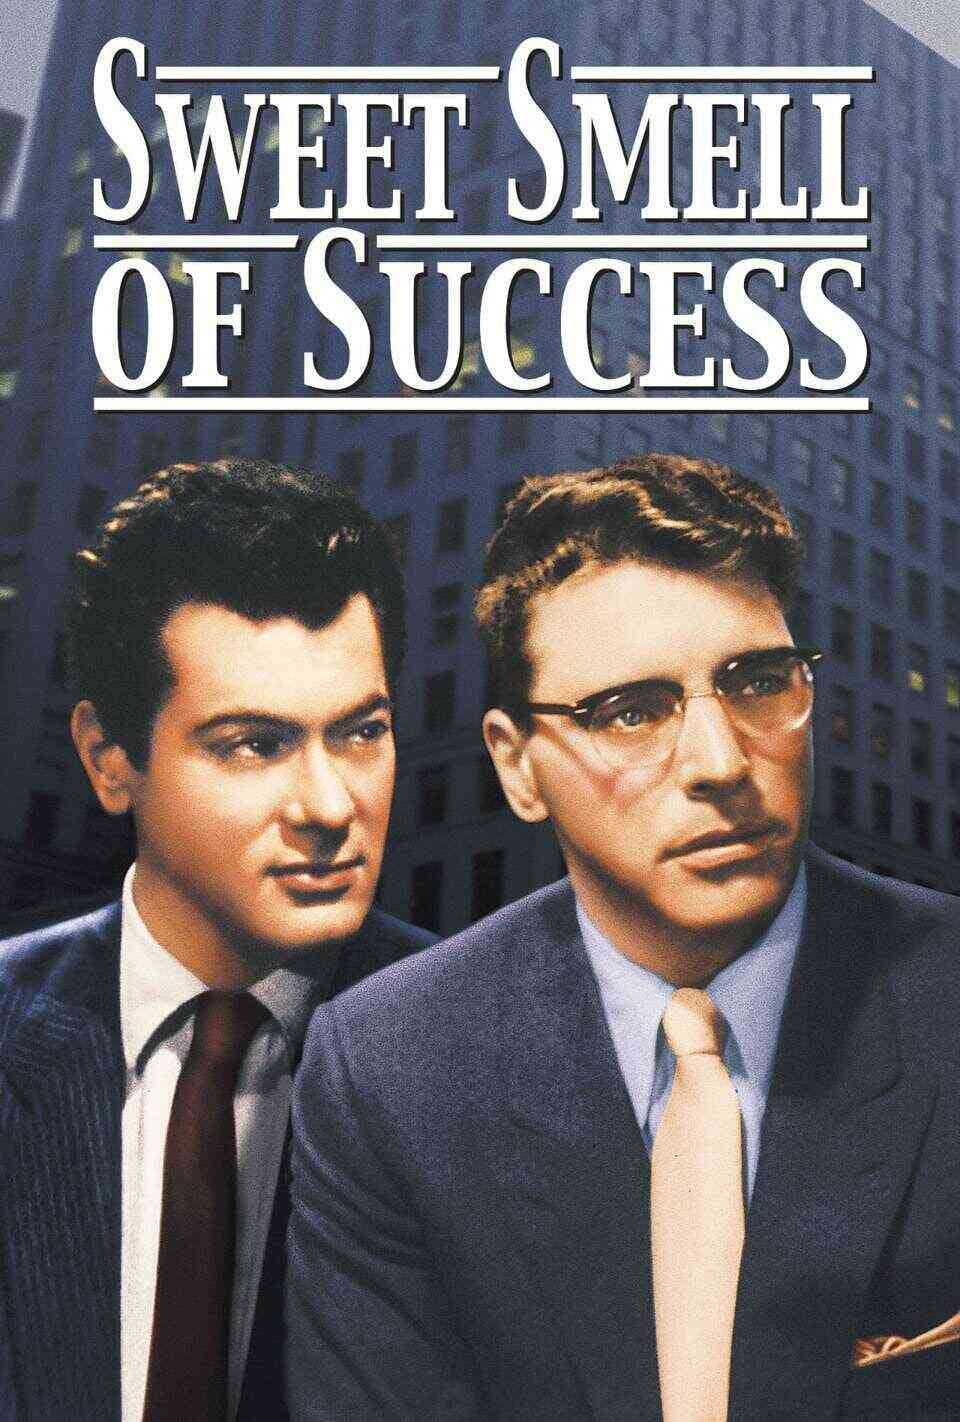 Read Sweet Smell of Success screenplay (poster)